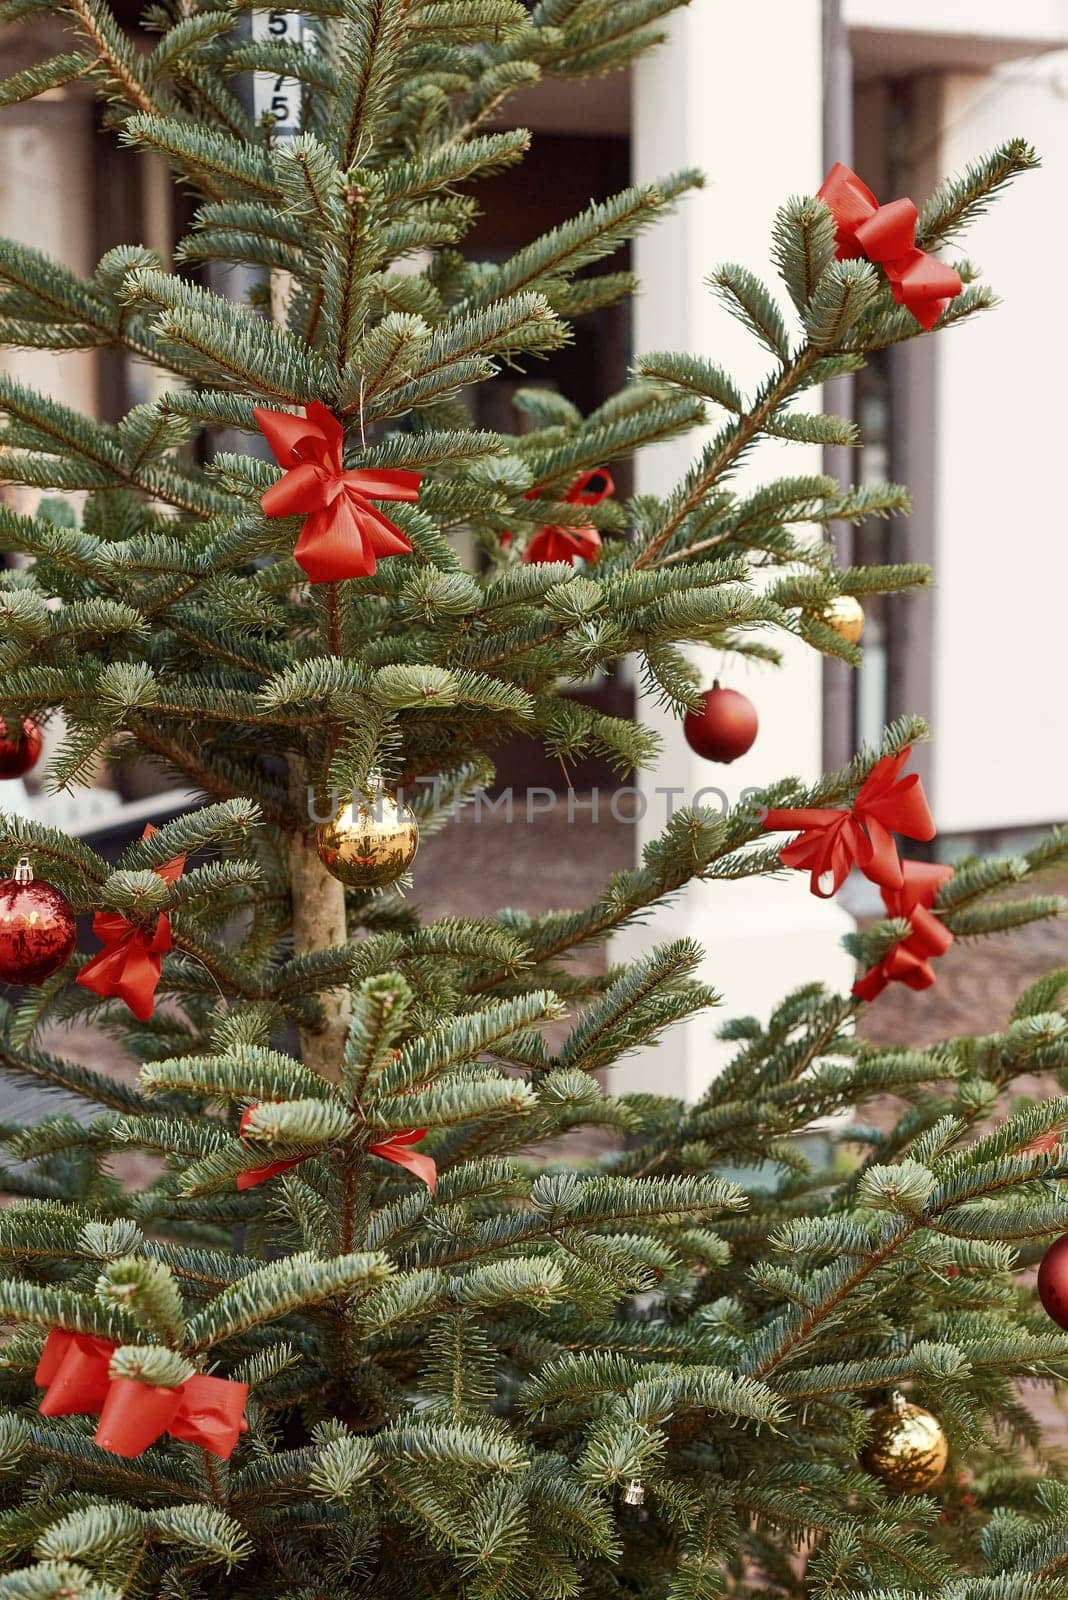 Festive Street Scene: Close-Up of Christmas Tree with Red Ornaments. Close-Up View of Festively Decorated Christmas Tree on the Street with Red Ornaments by Andrii_Ko